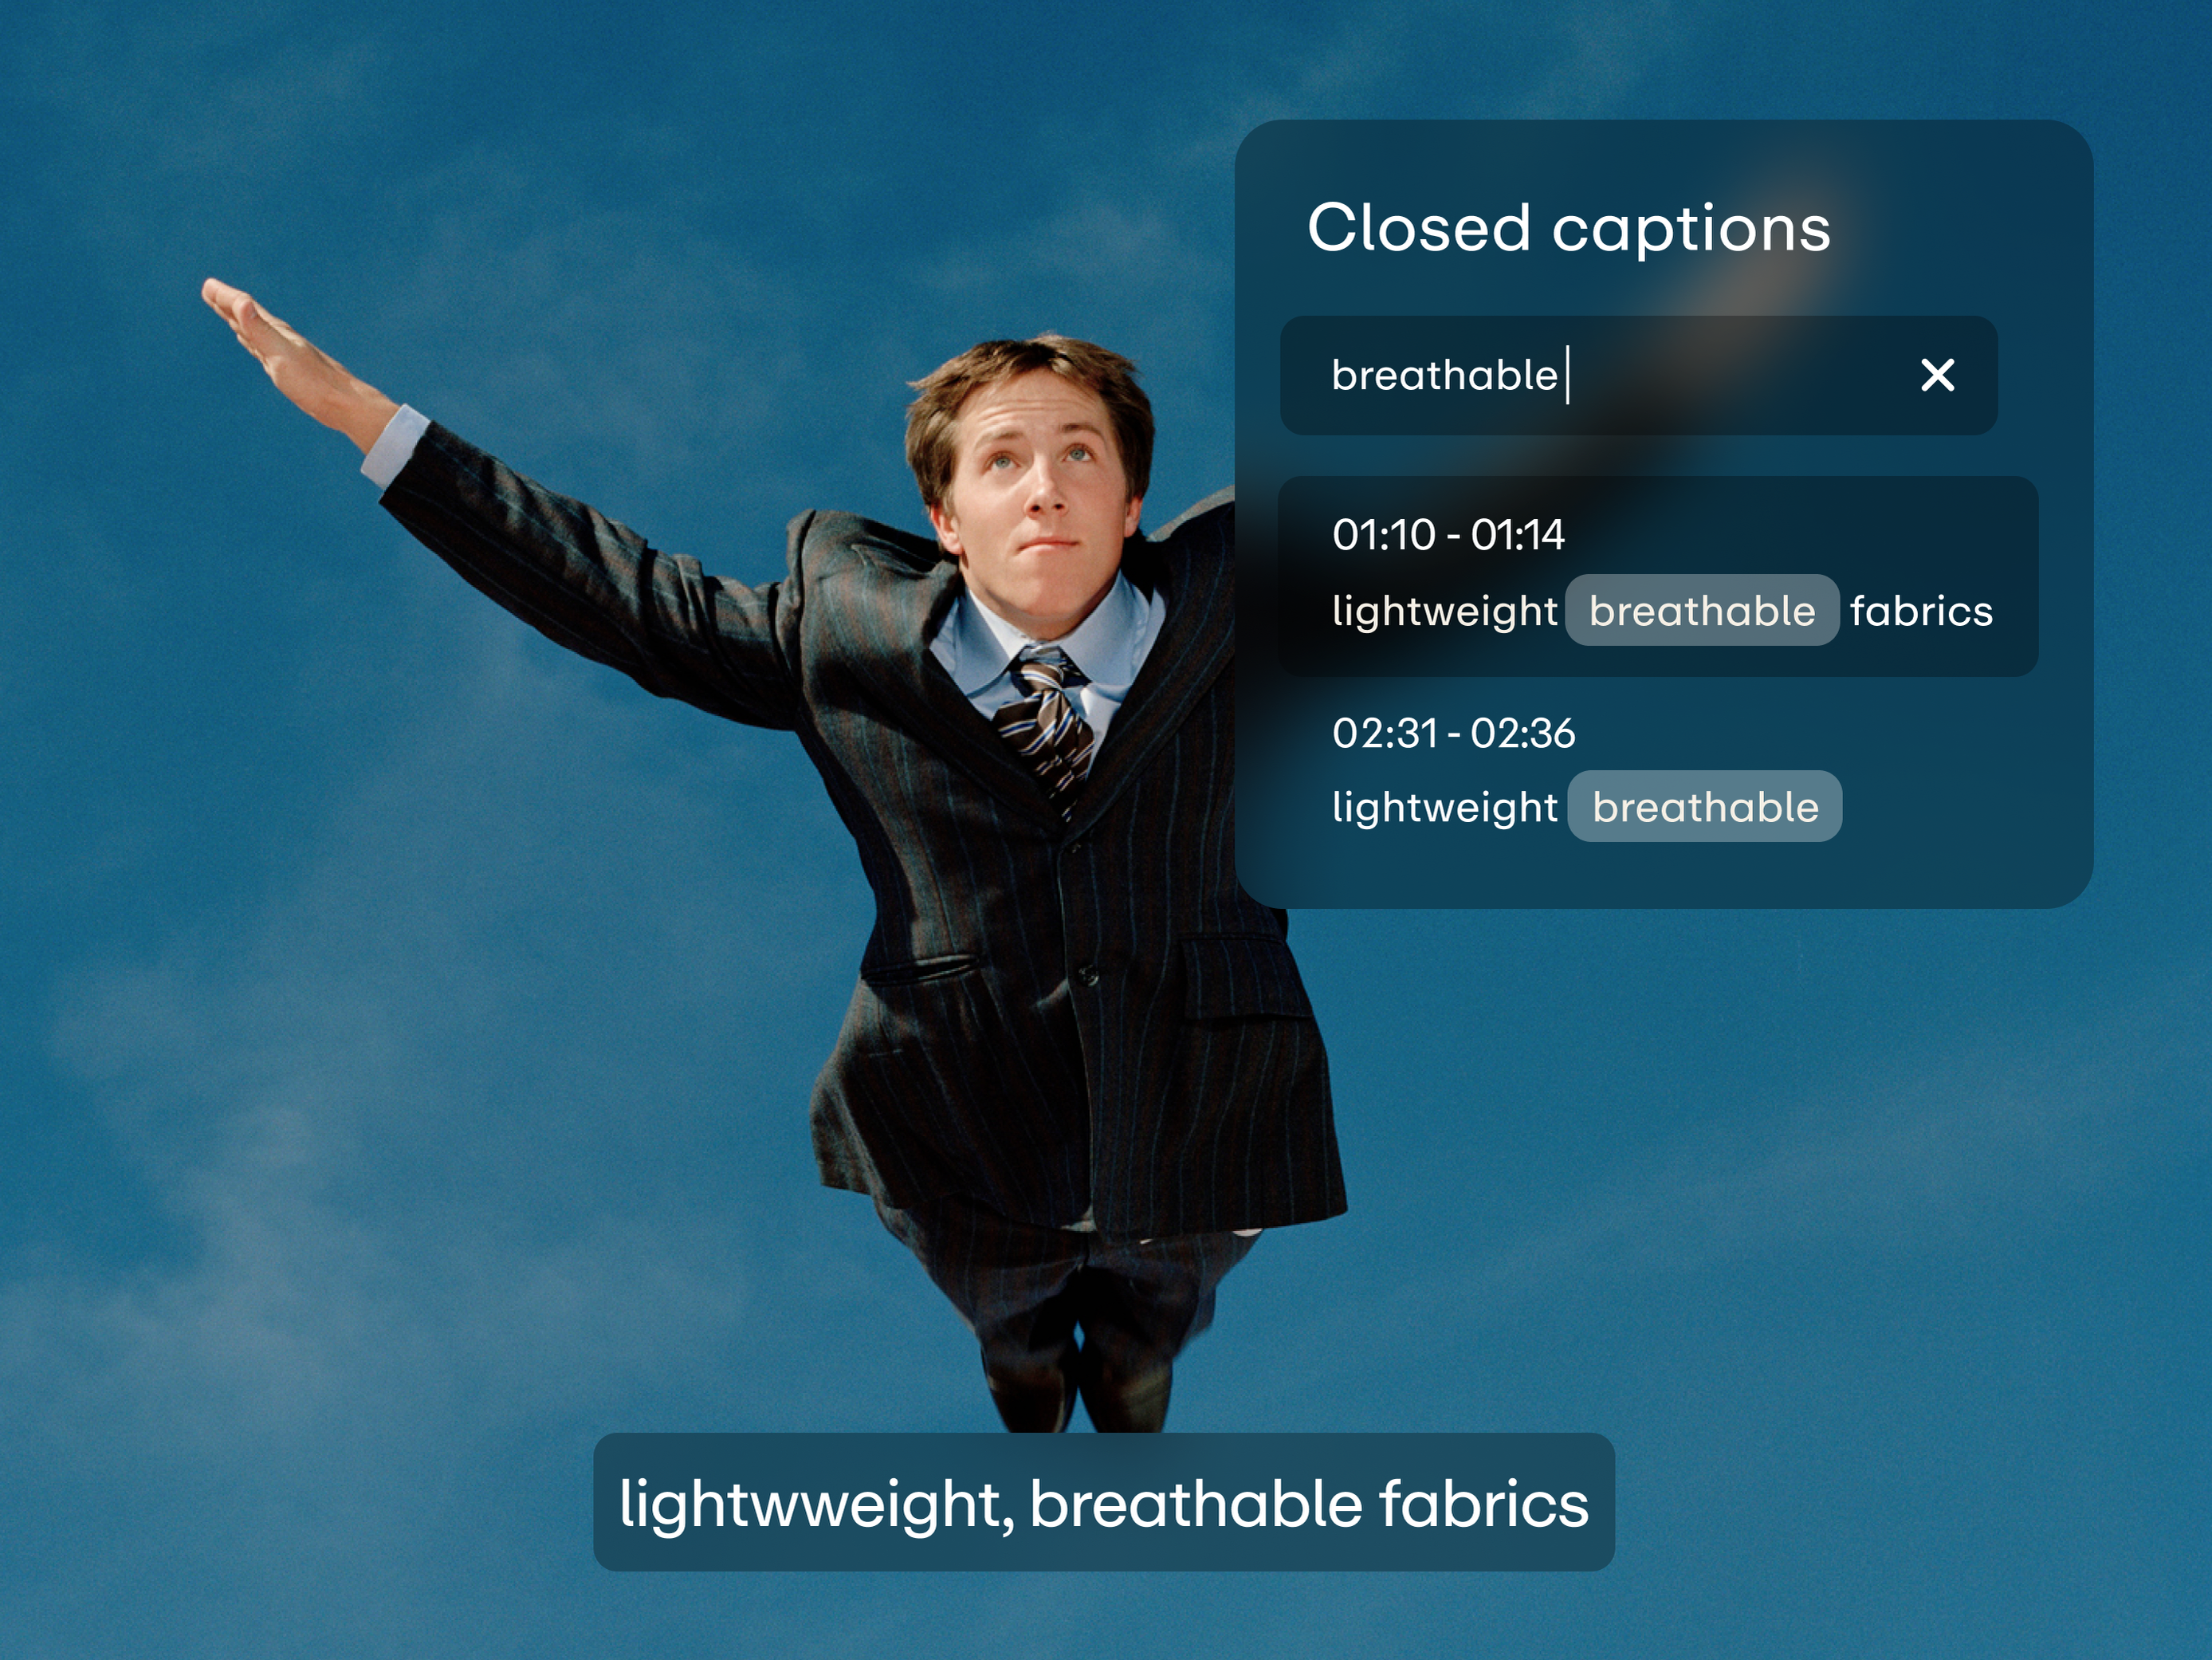 Video transcript search for the word breathable, which is overlaid by a man in a suit flying